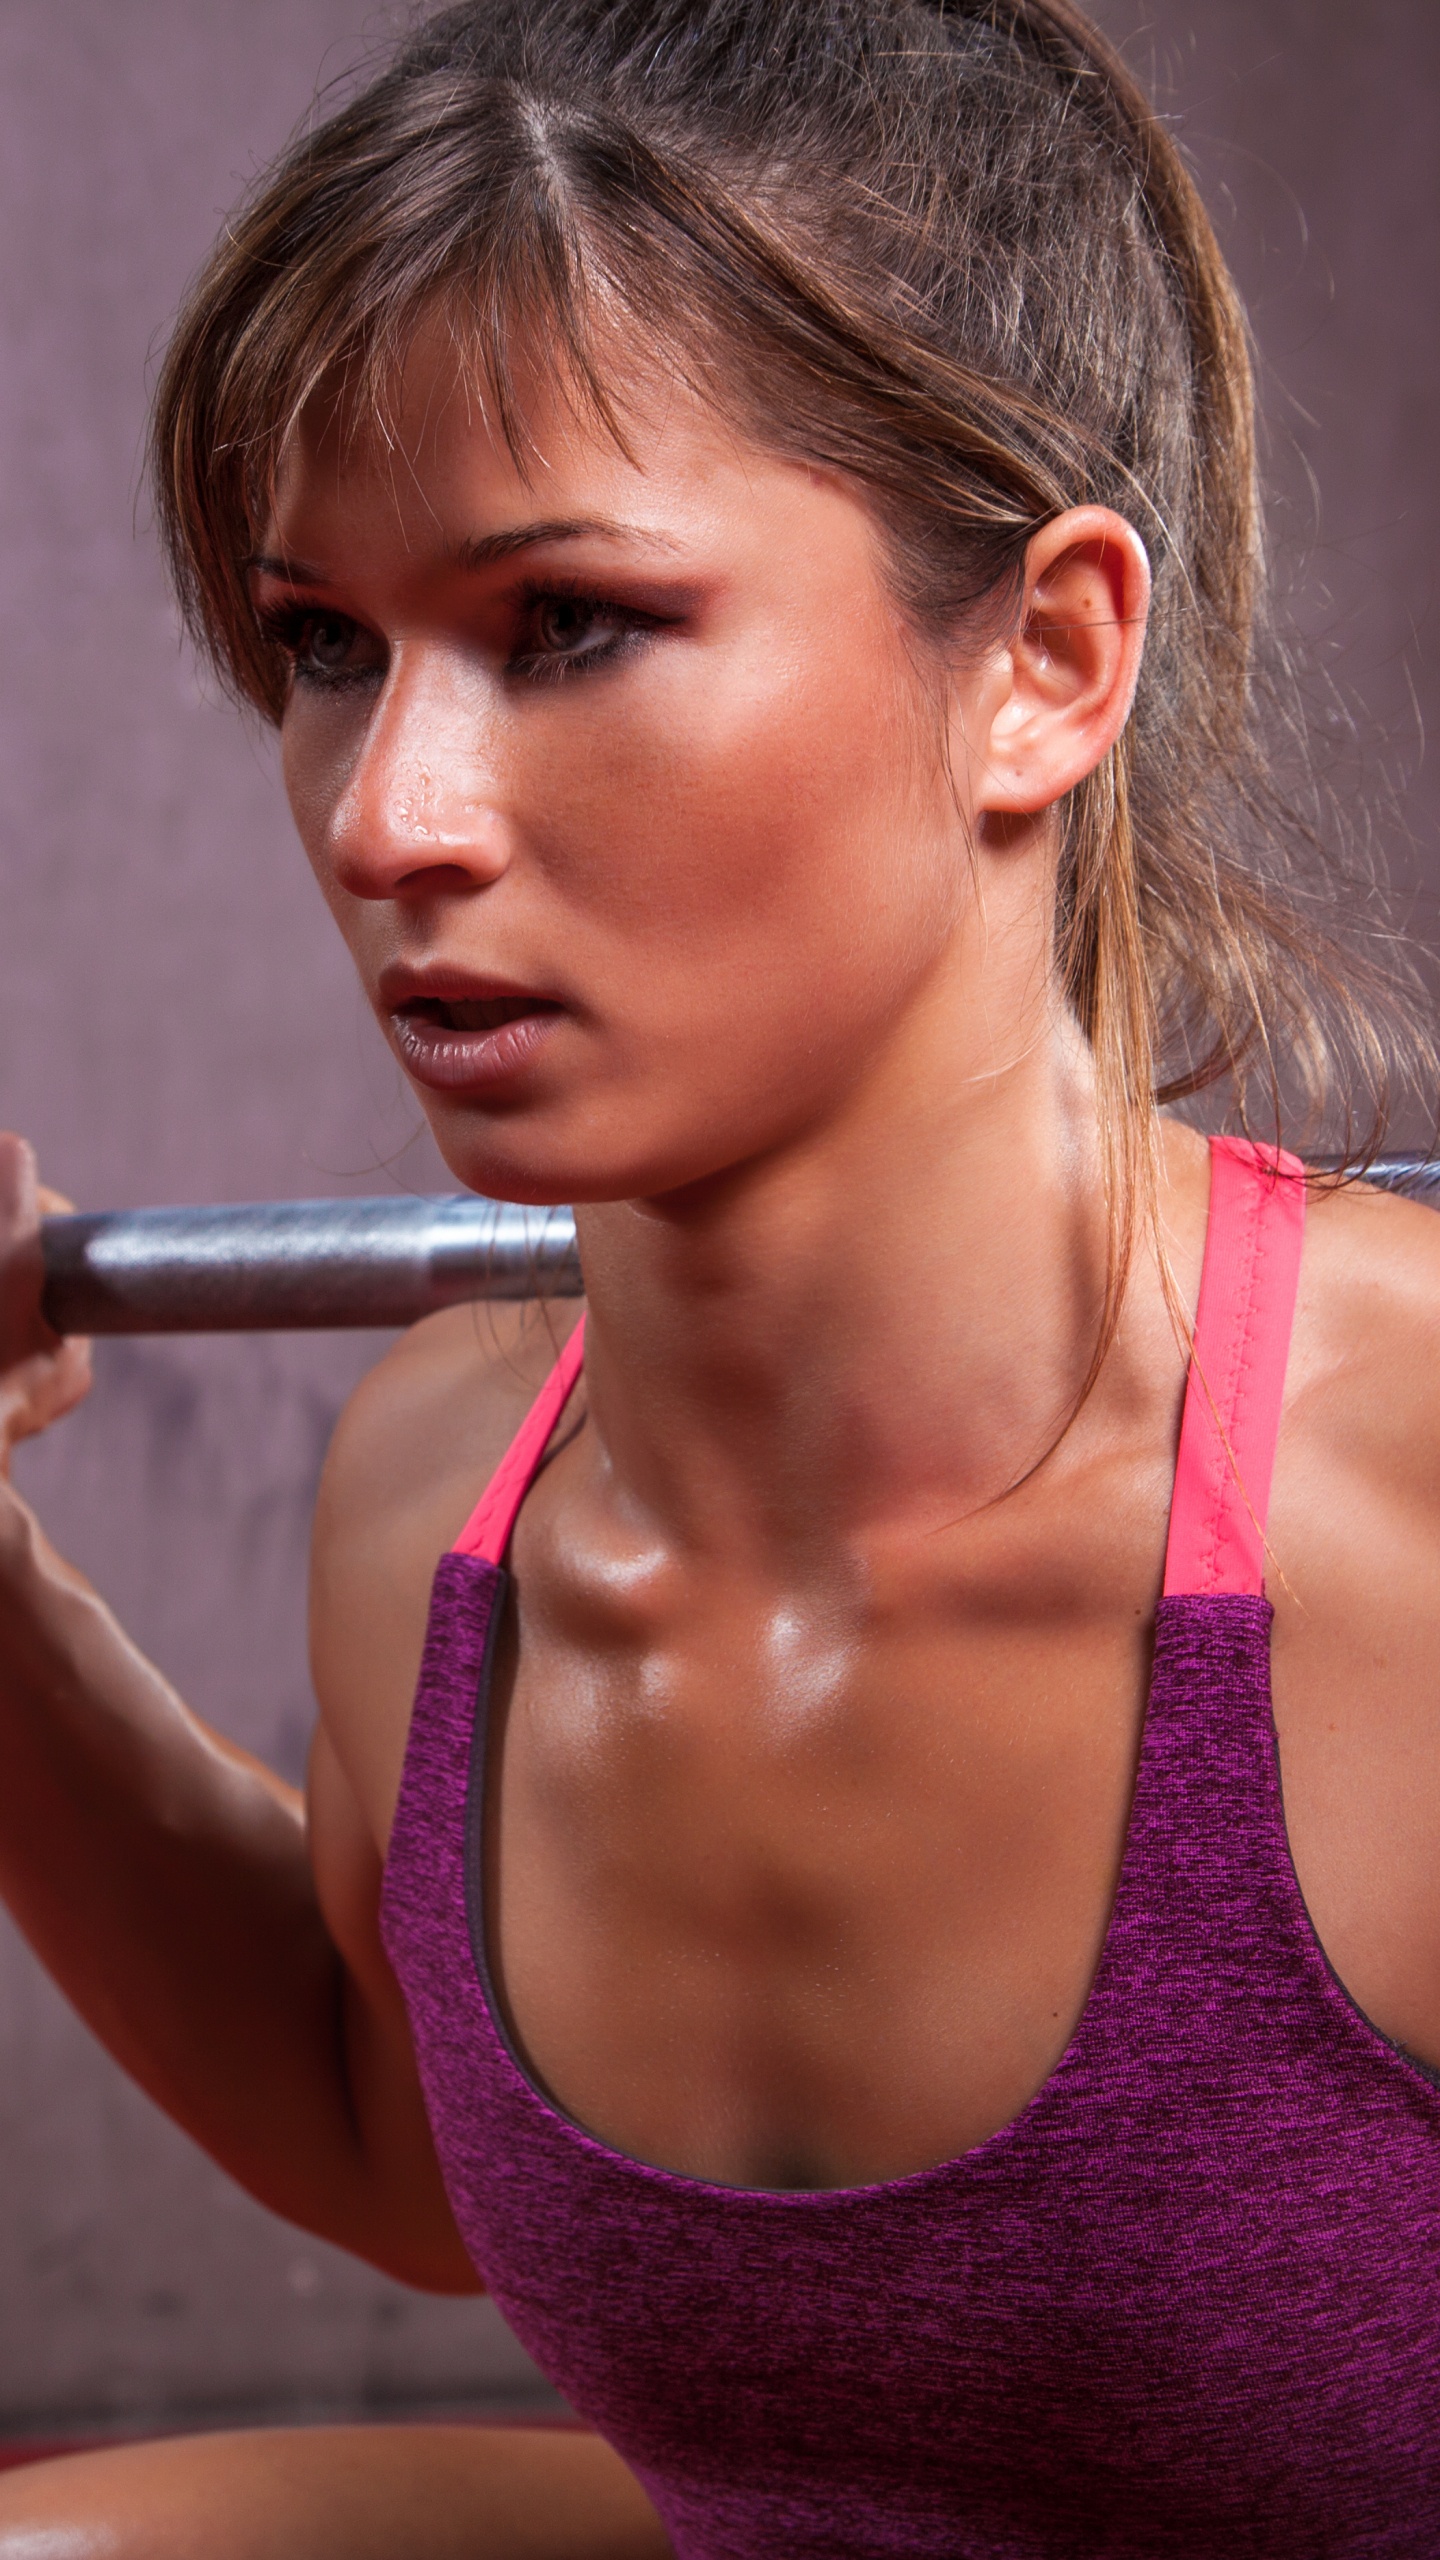 Woman in Pink Tank Top Holding Barbell. Wallpaper in 1440x2560 Resolution